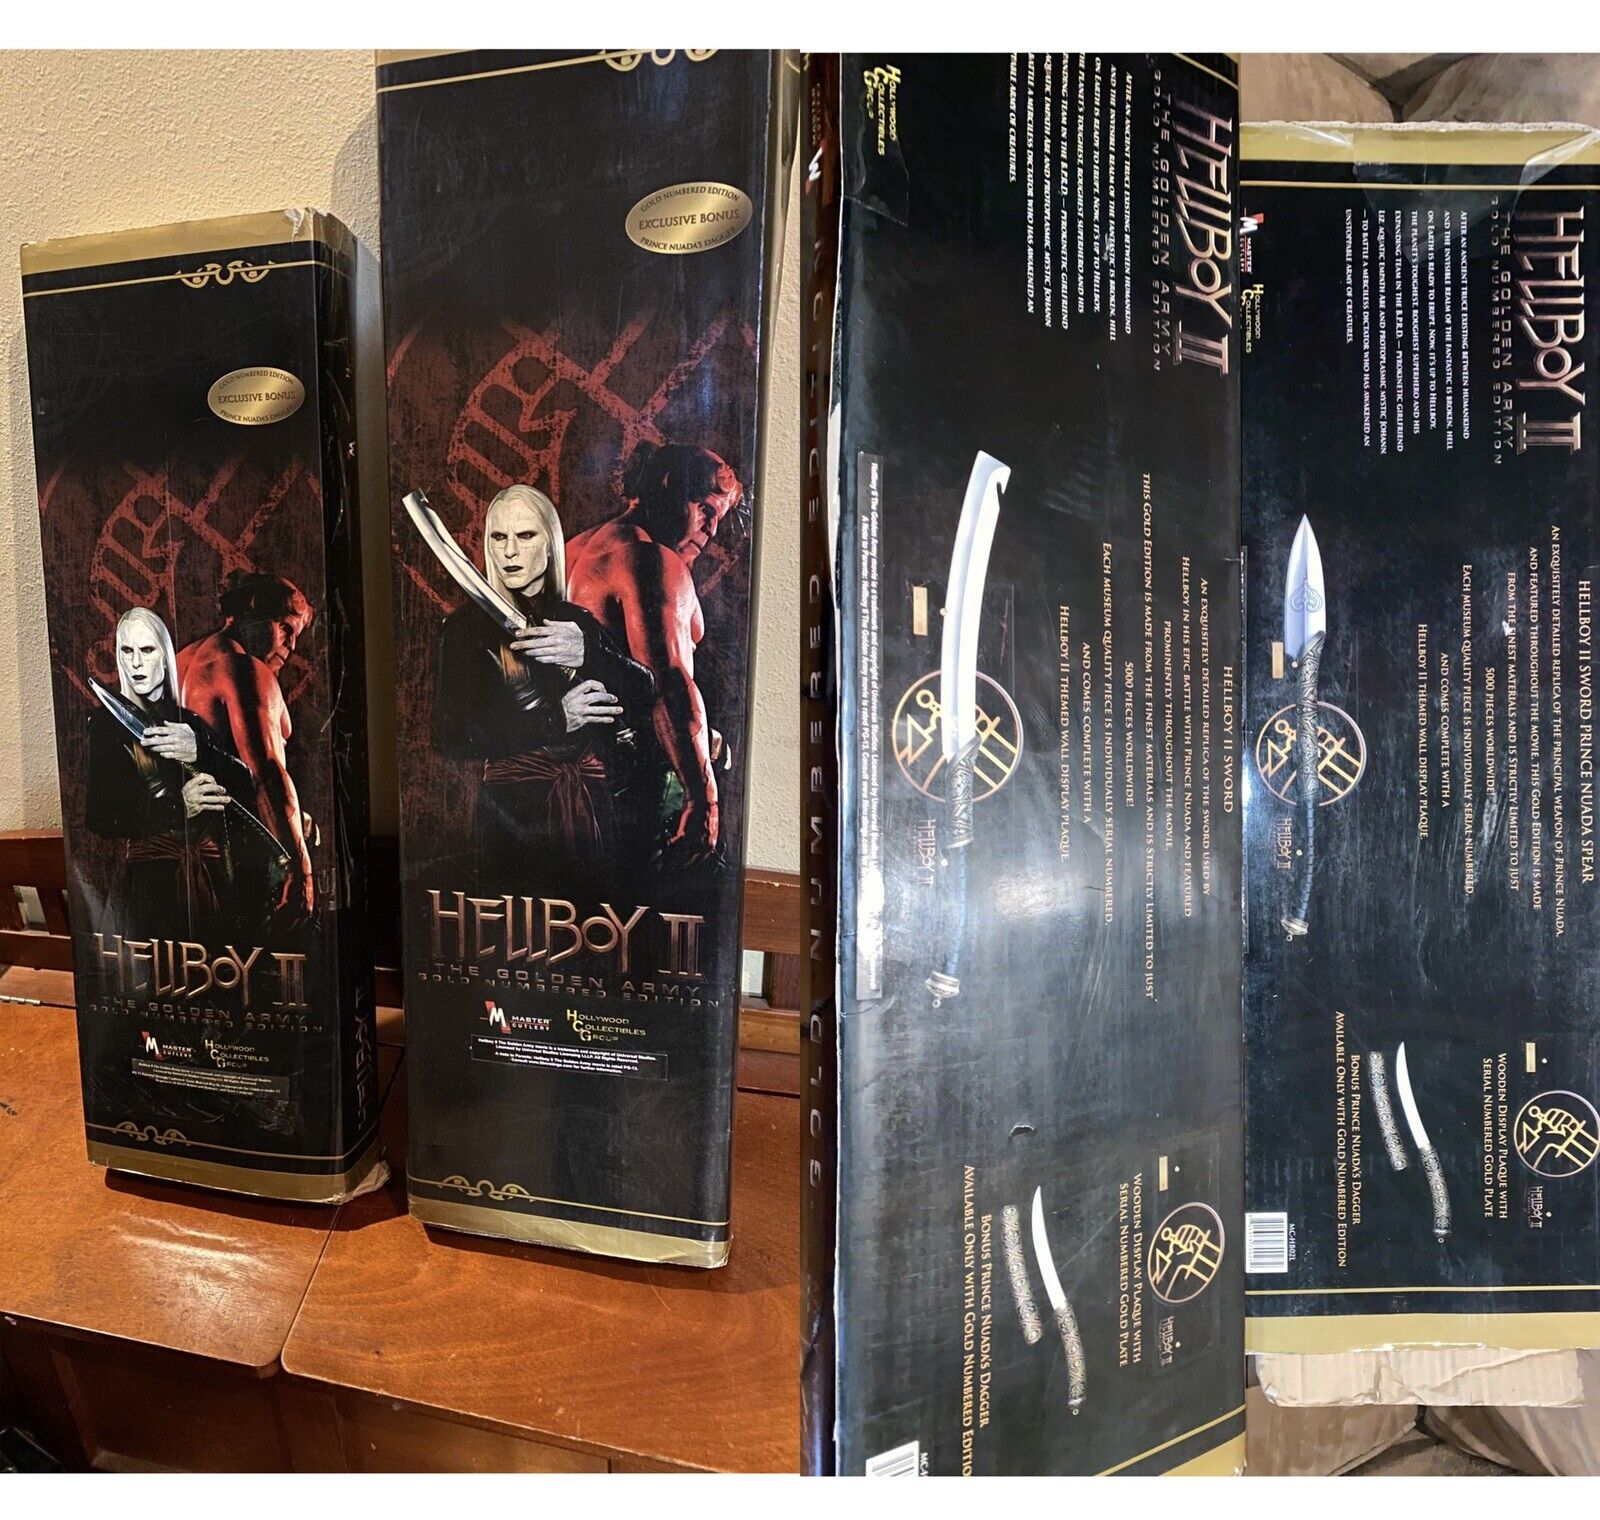 Hellboy 2 Collectible Film Swords and Certificates of Authenticity